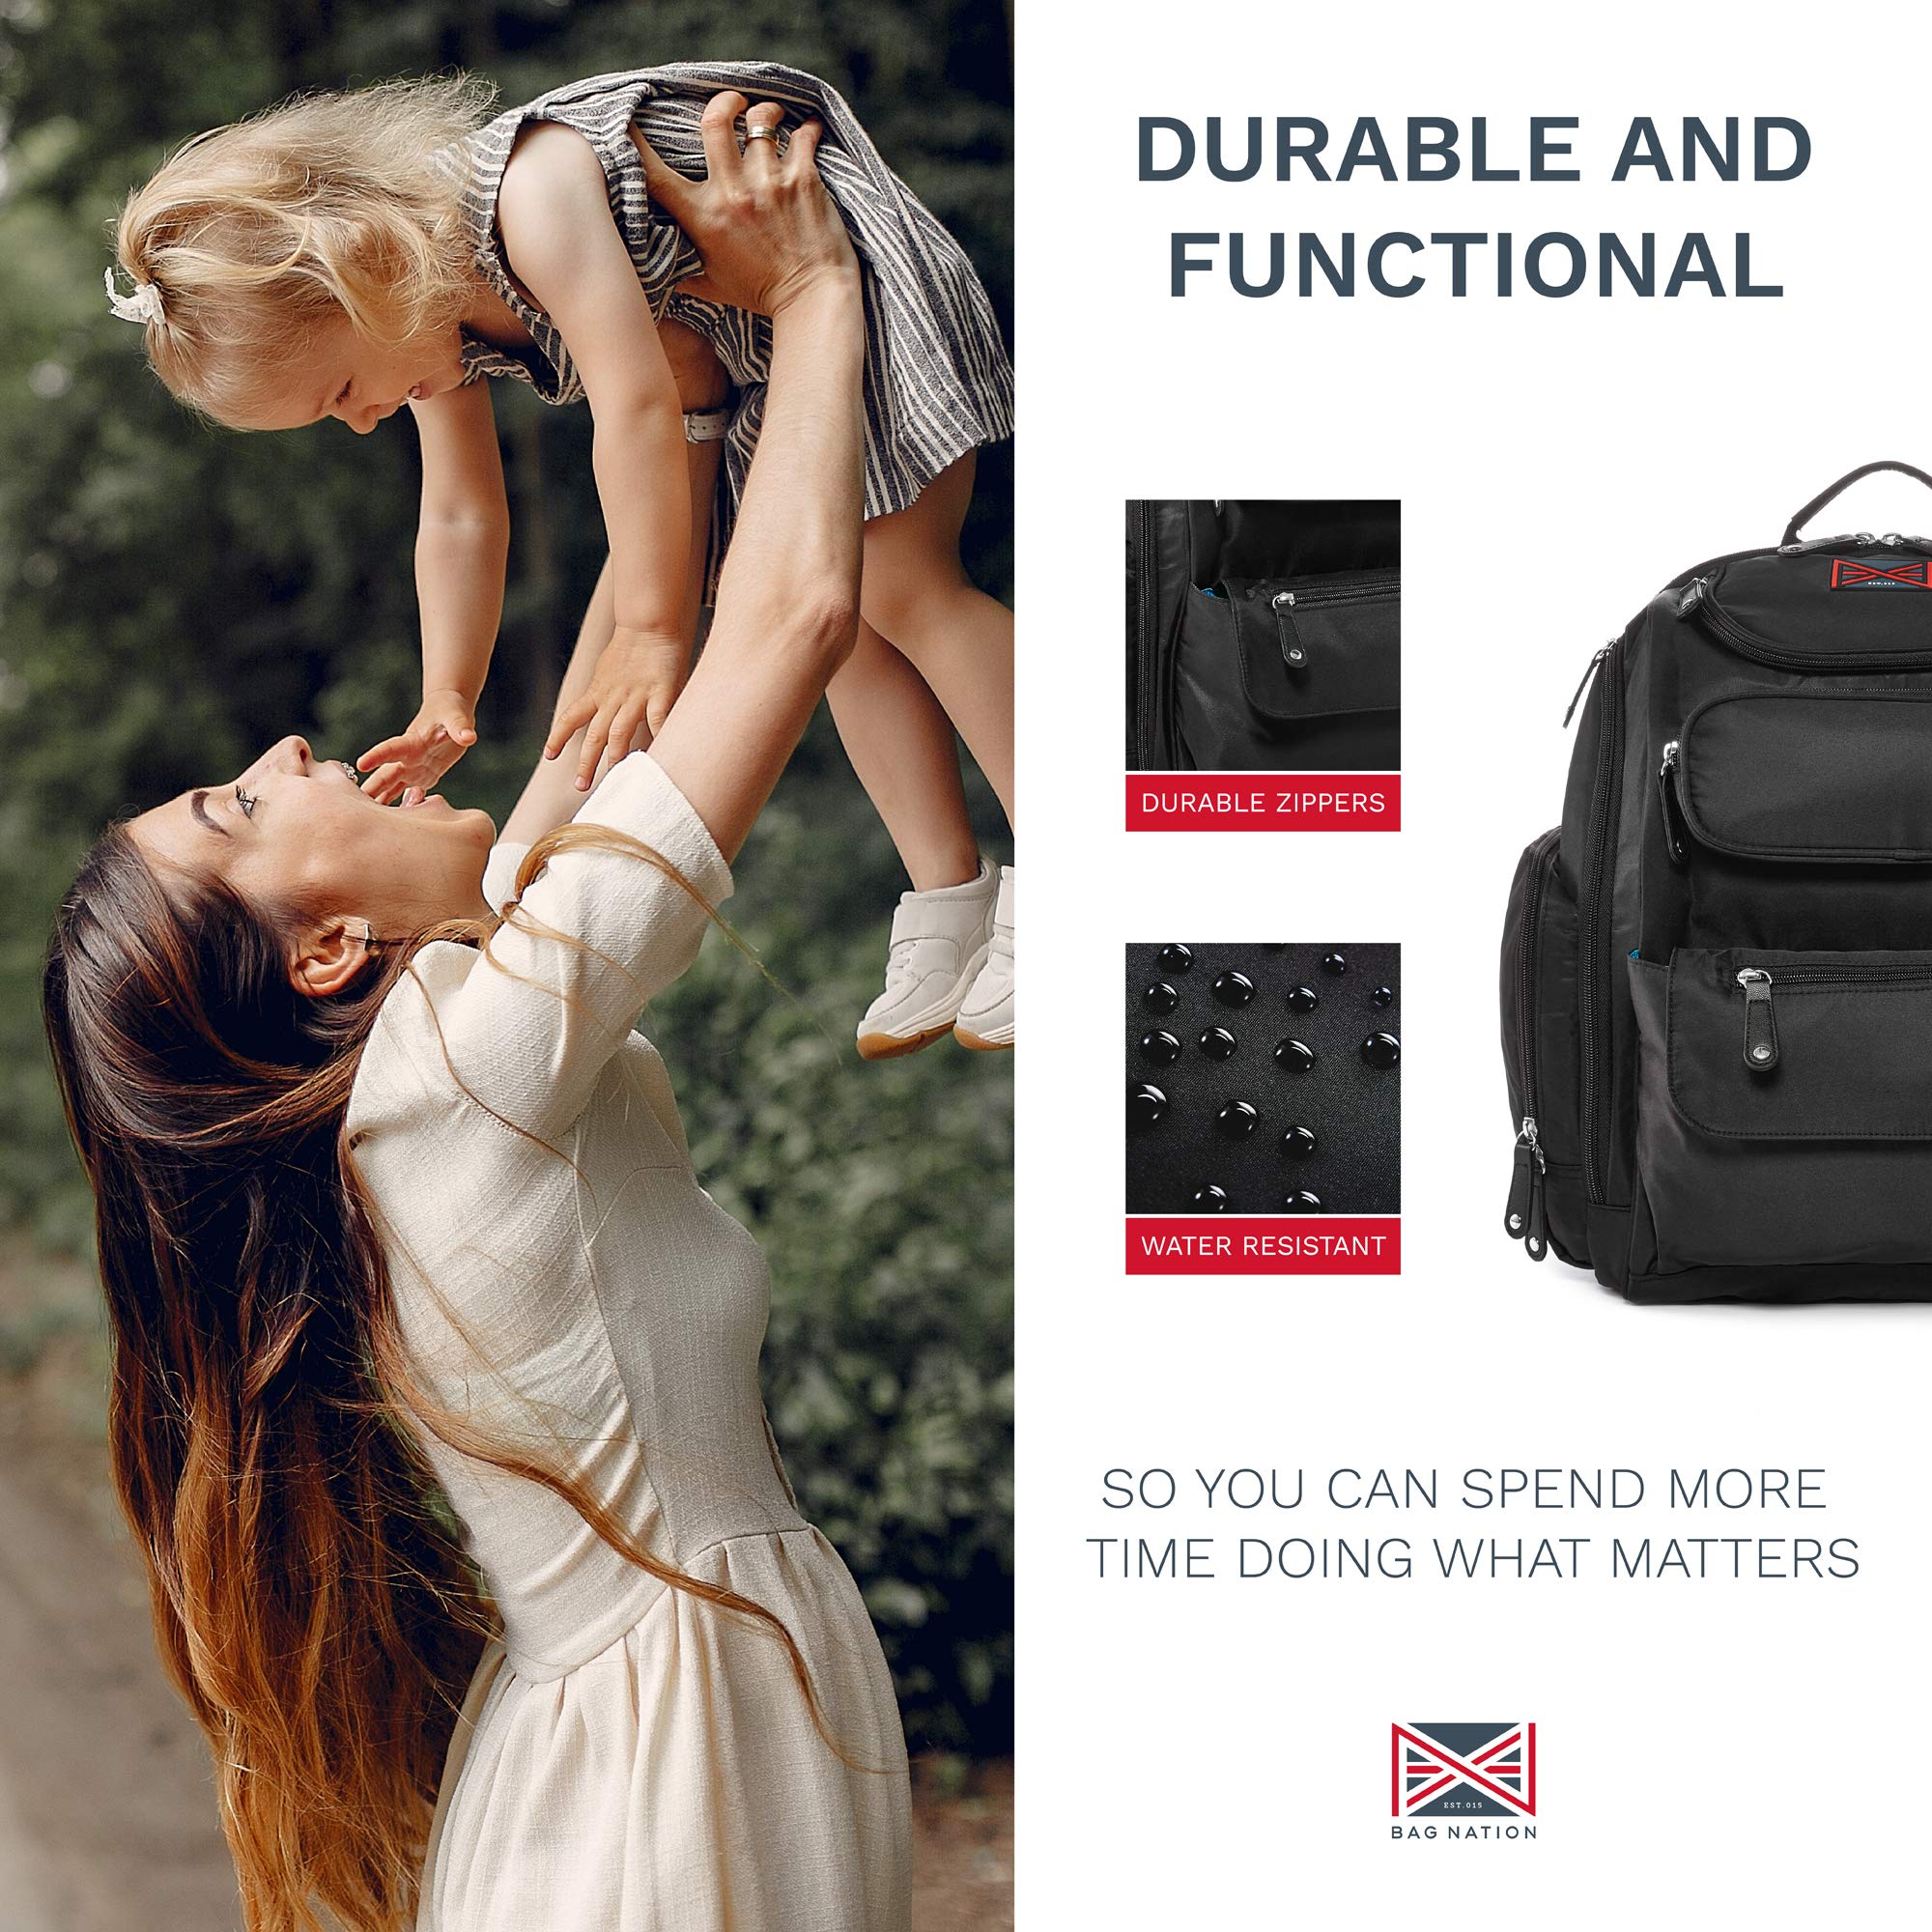 Bag Nation Extra Large Diaper Bag Backpack for Twins or 2 Kids | Unisex 3 in 1 with Stroller Straps | Holds All Your Baby’s Essentials (Black)